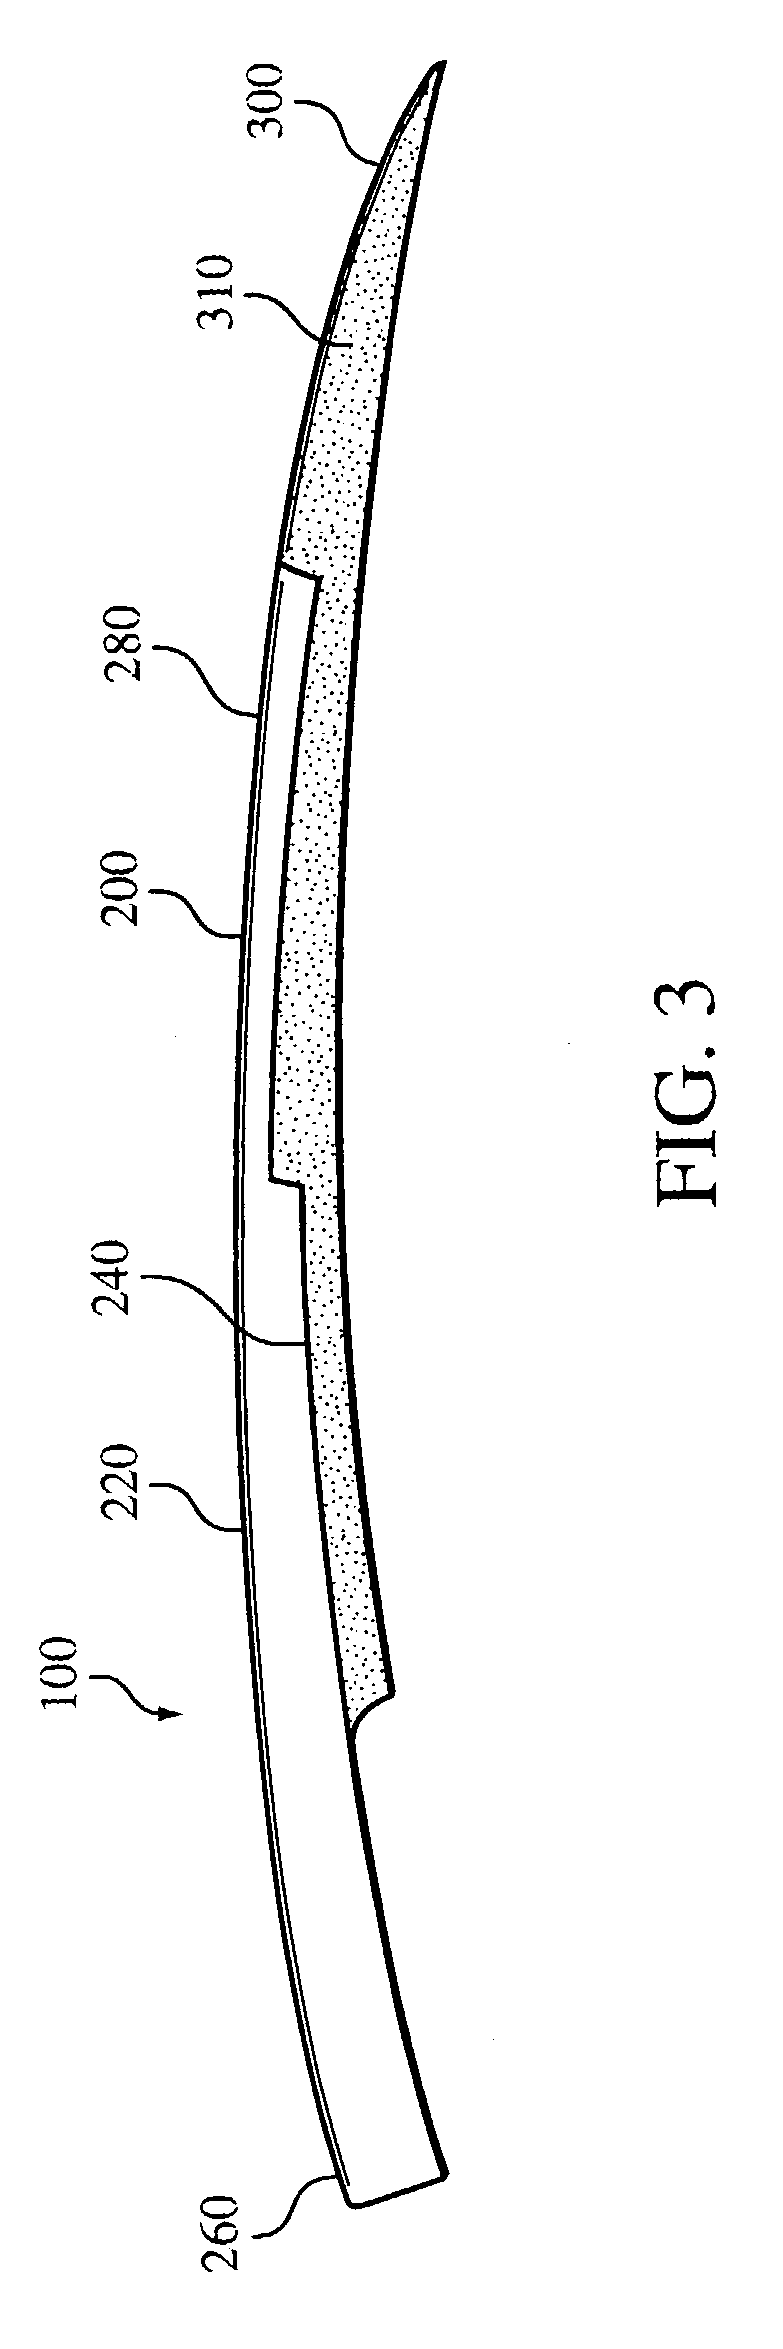 Conformable artificial fingernail and method of making same